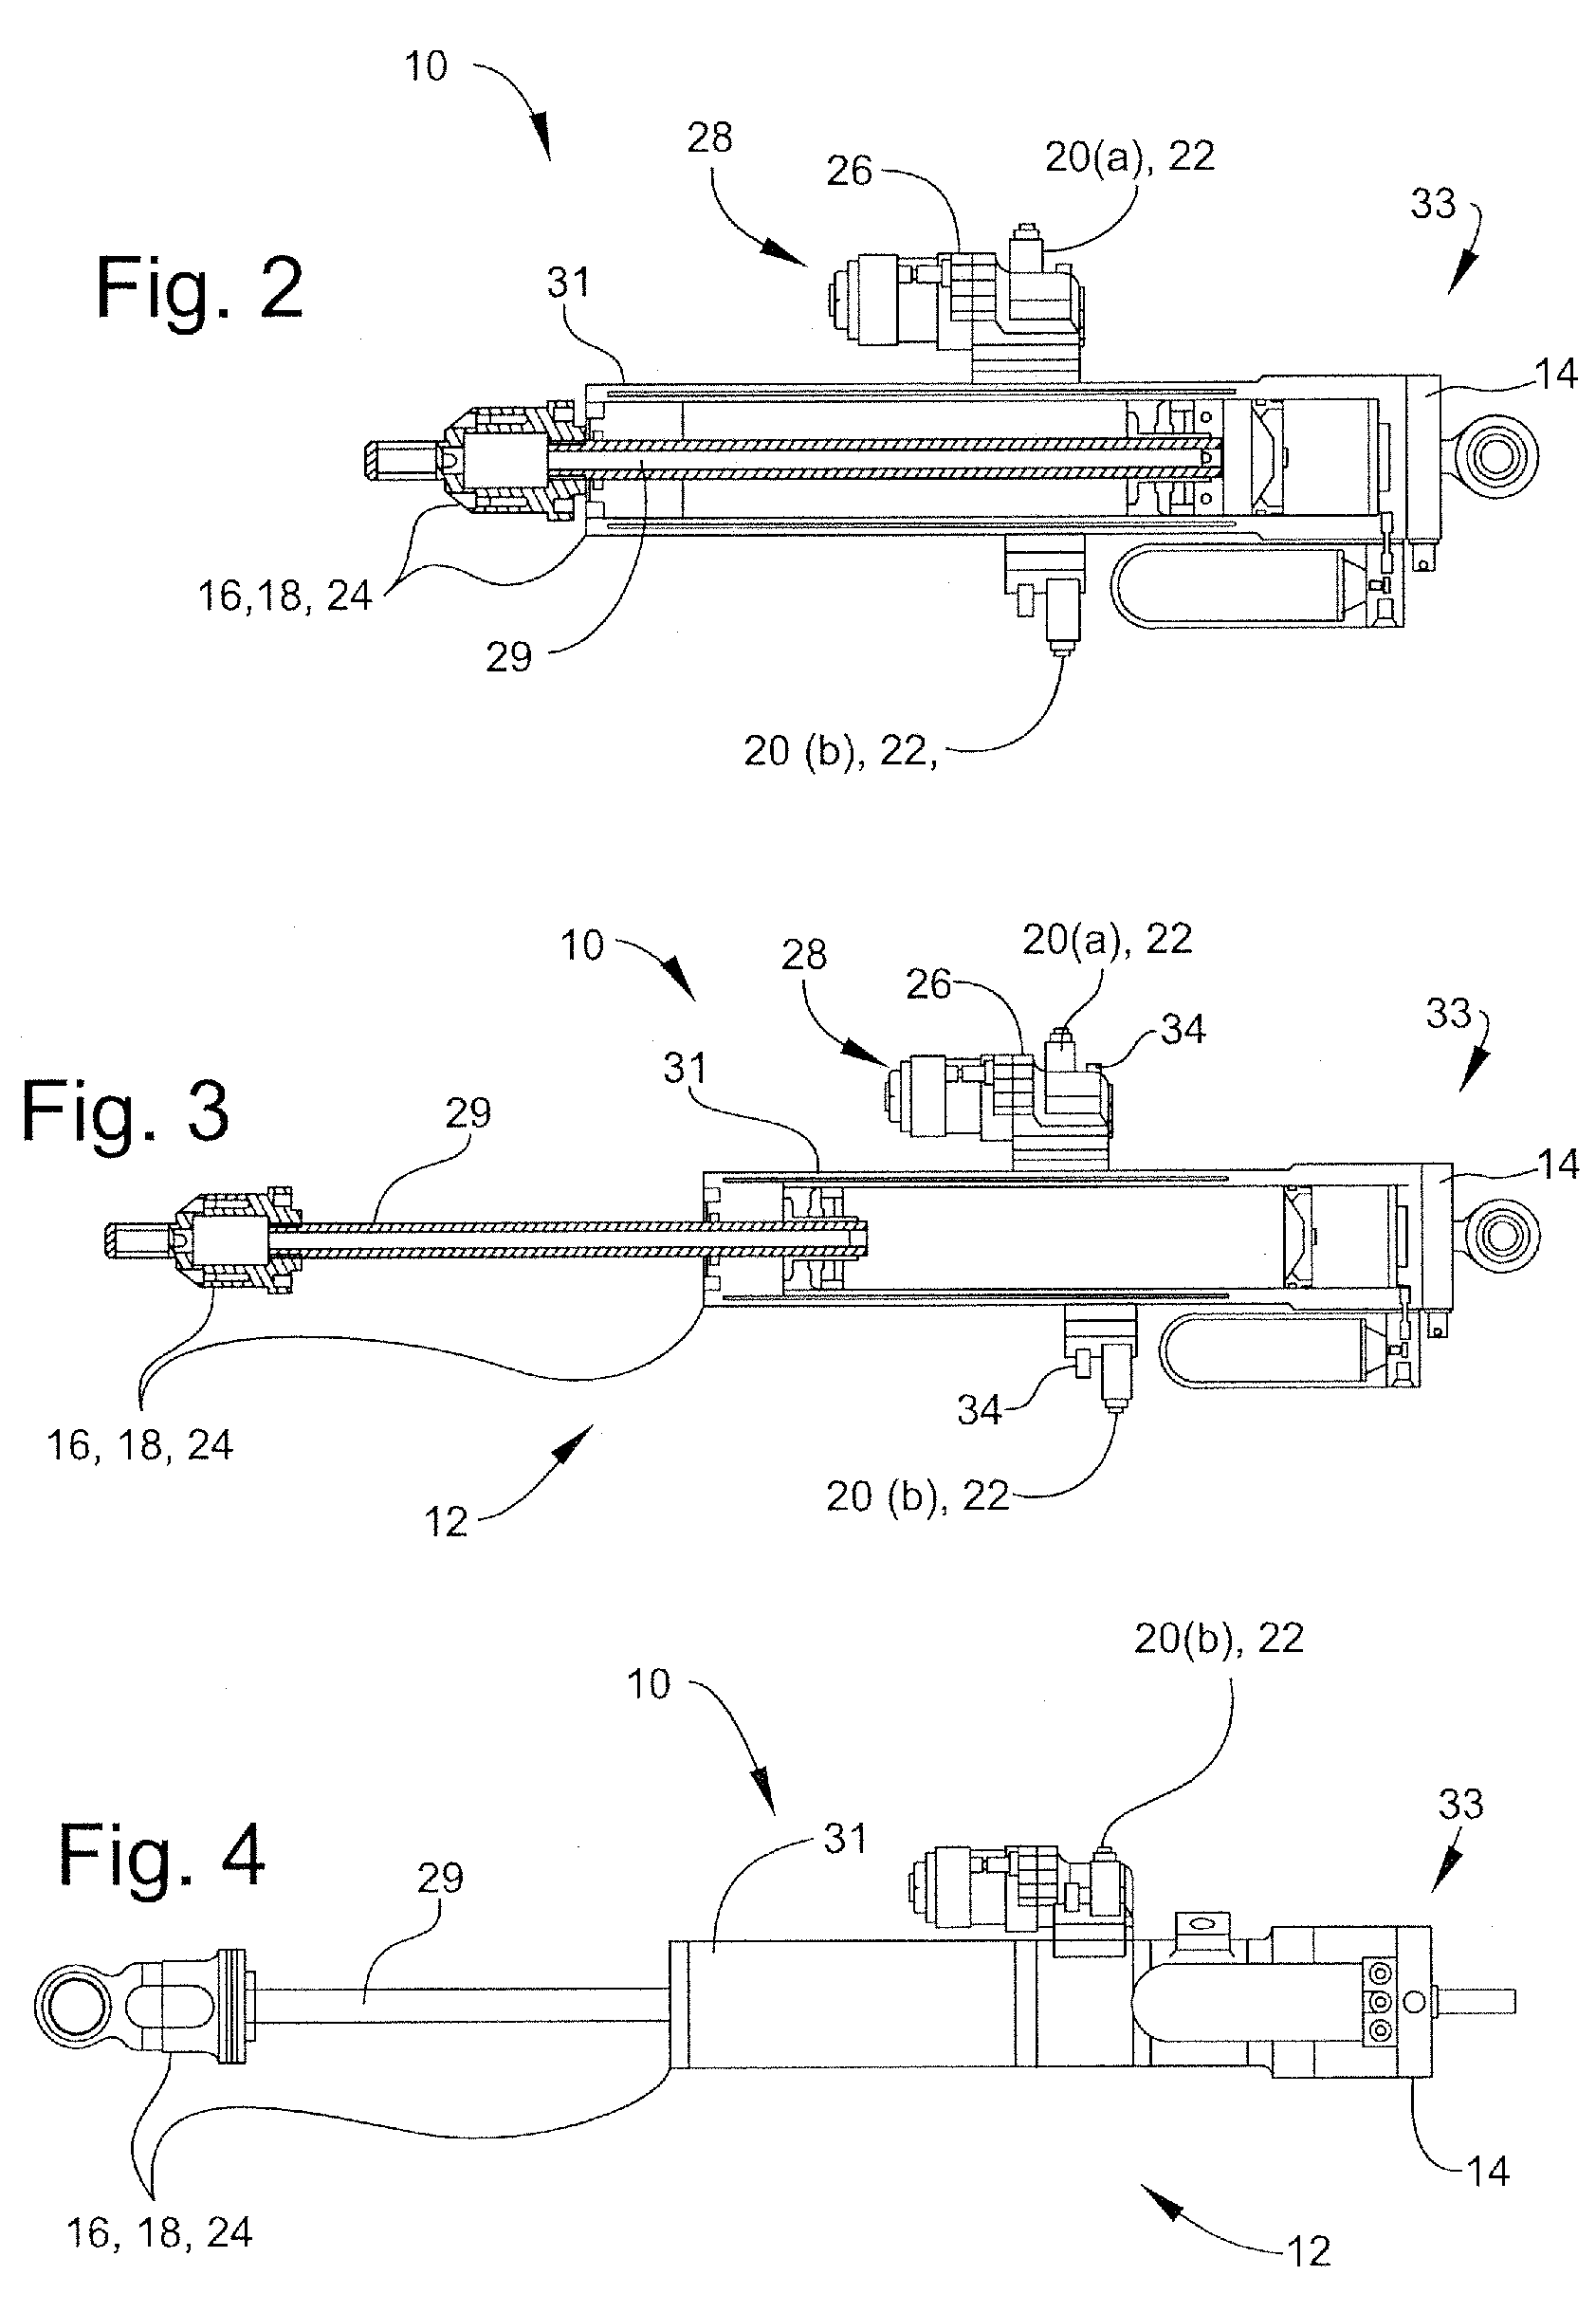 Method, system, and device for optimizing a vehicle's suspension